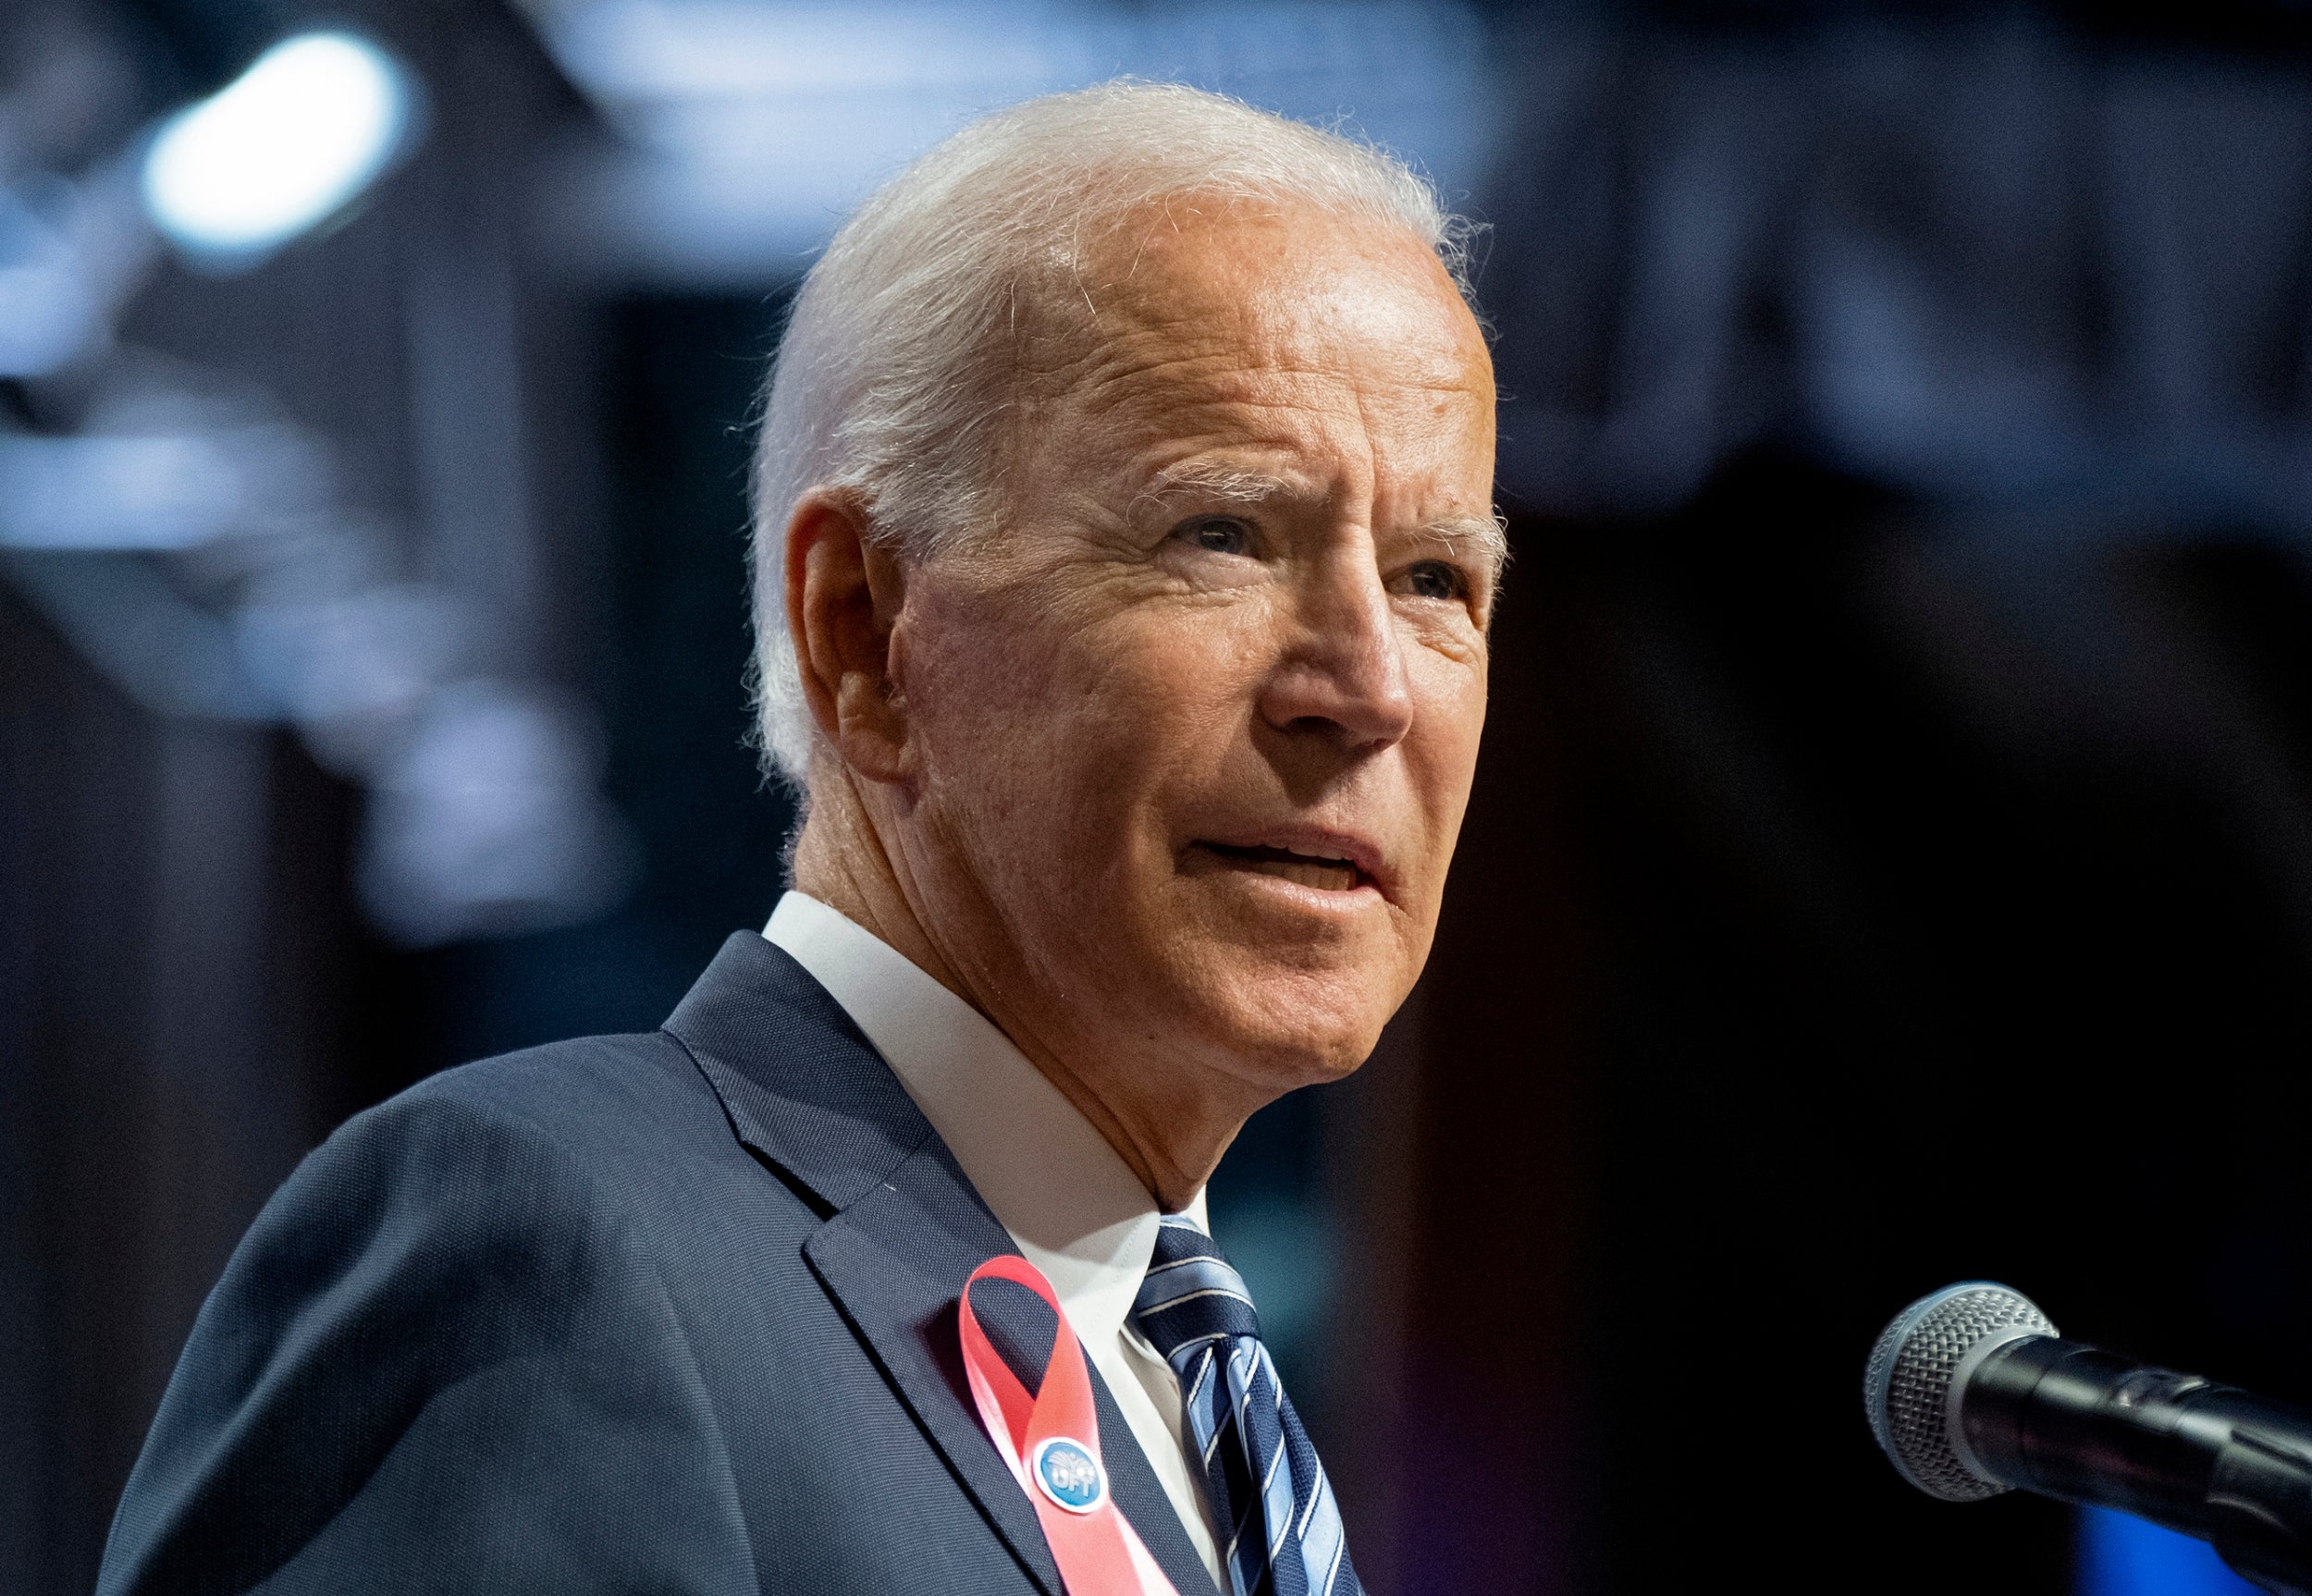 Joe Biden's campaign isn't going so well — but the ideas to fix it are even worse